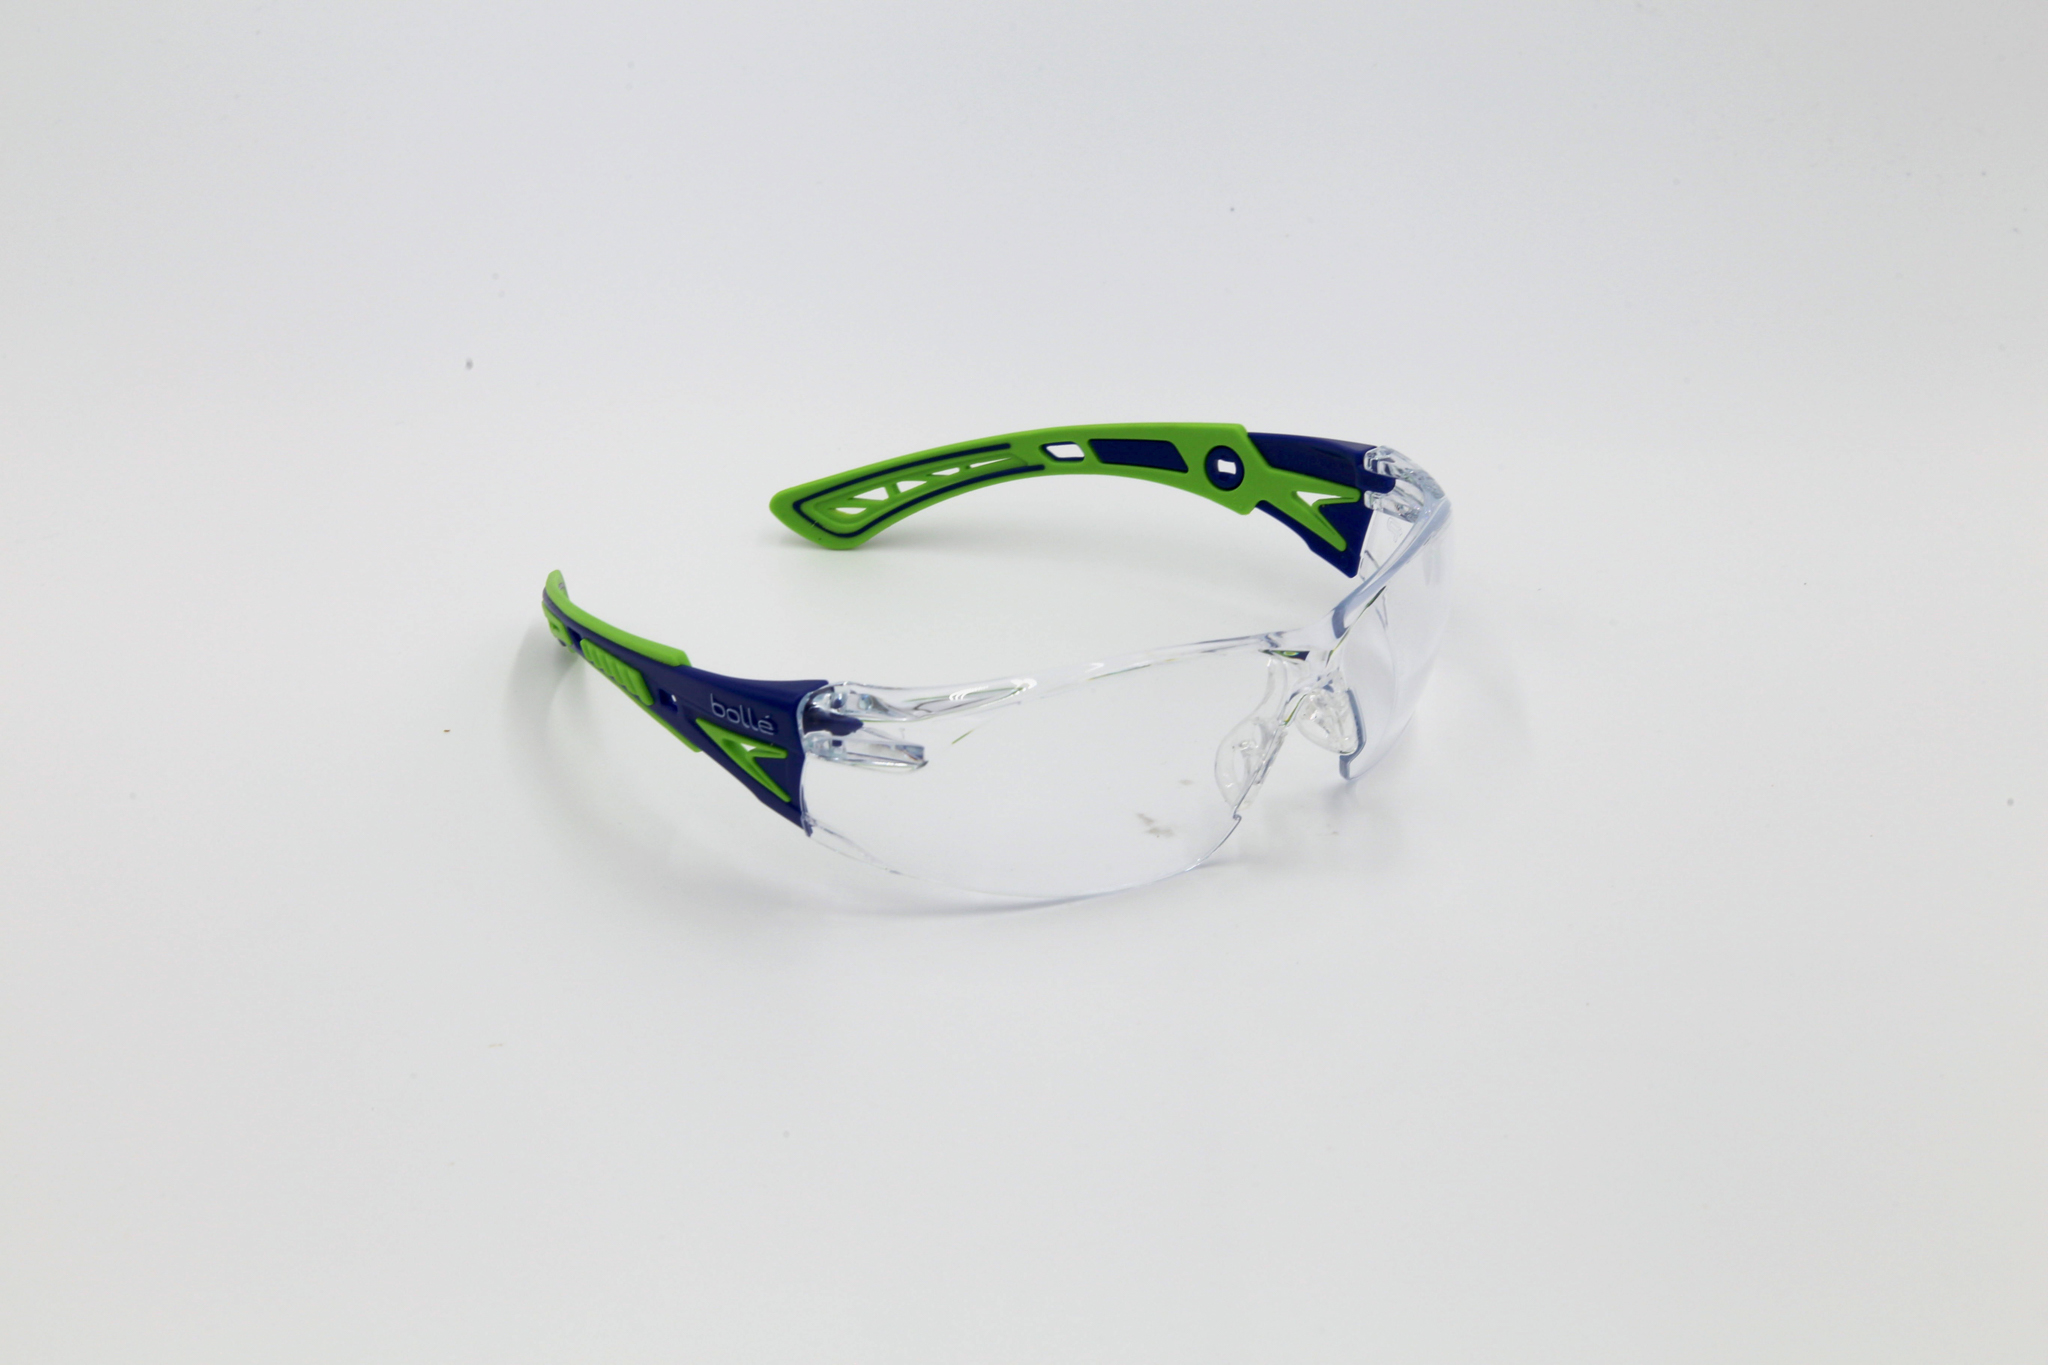 Green safety glasses on white background